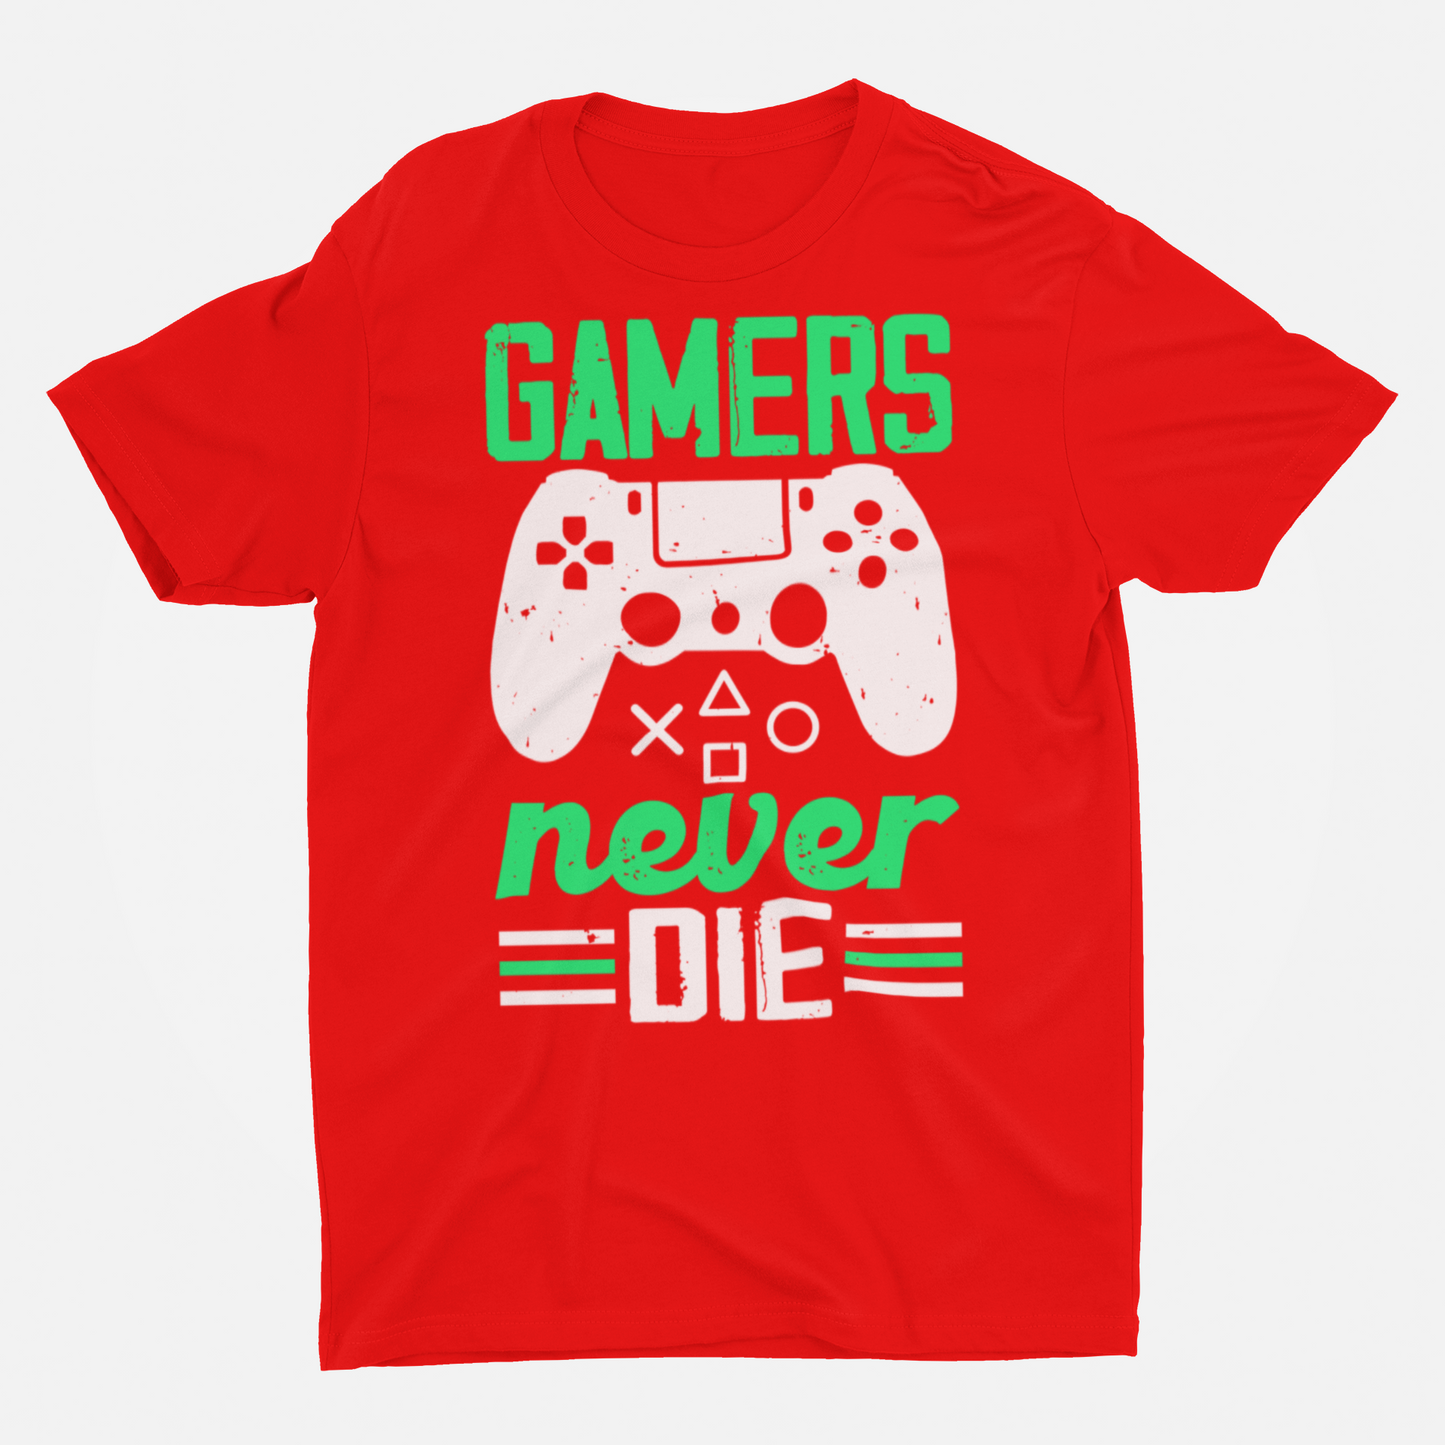 Gamers Never Die Red Round Neck T-Shirt for Men